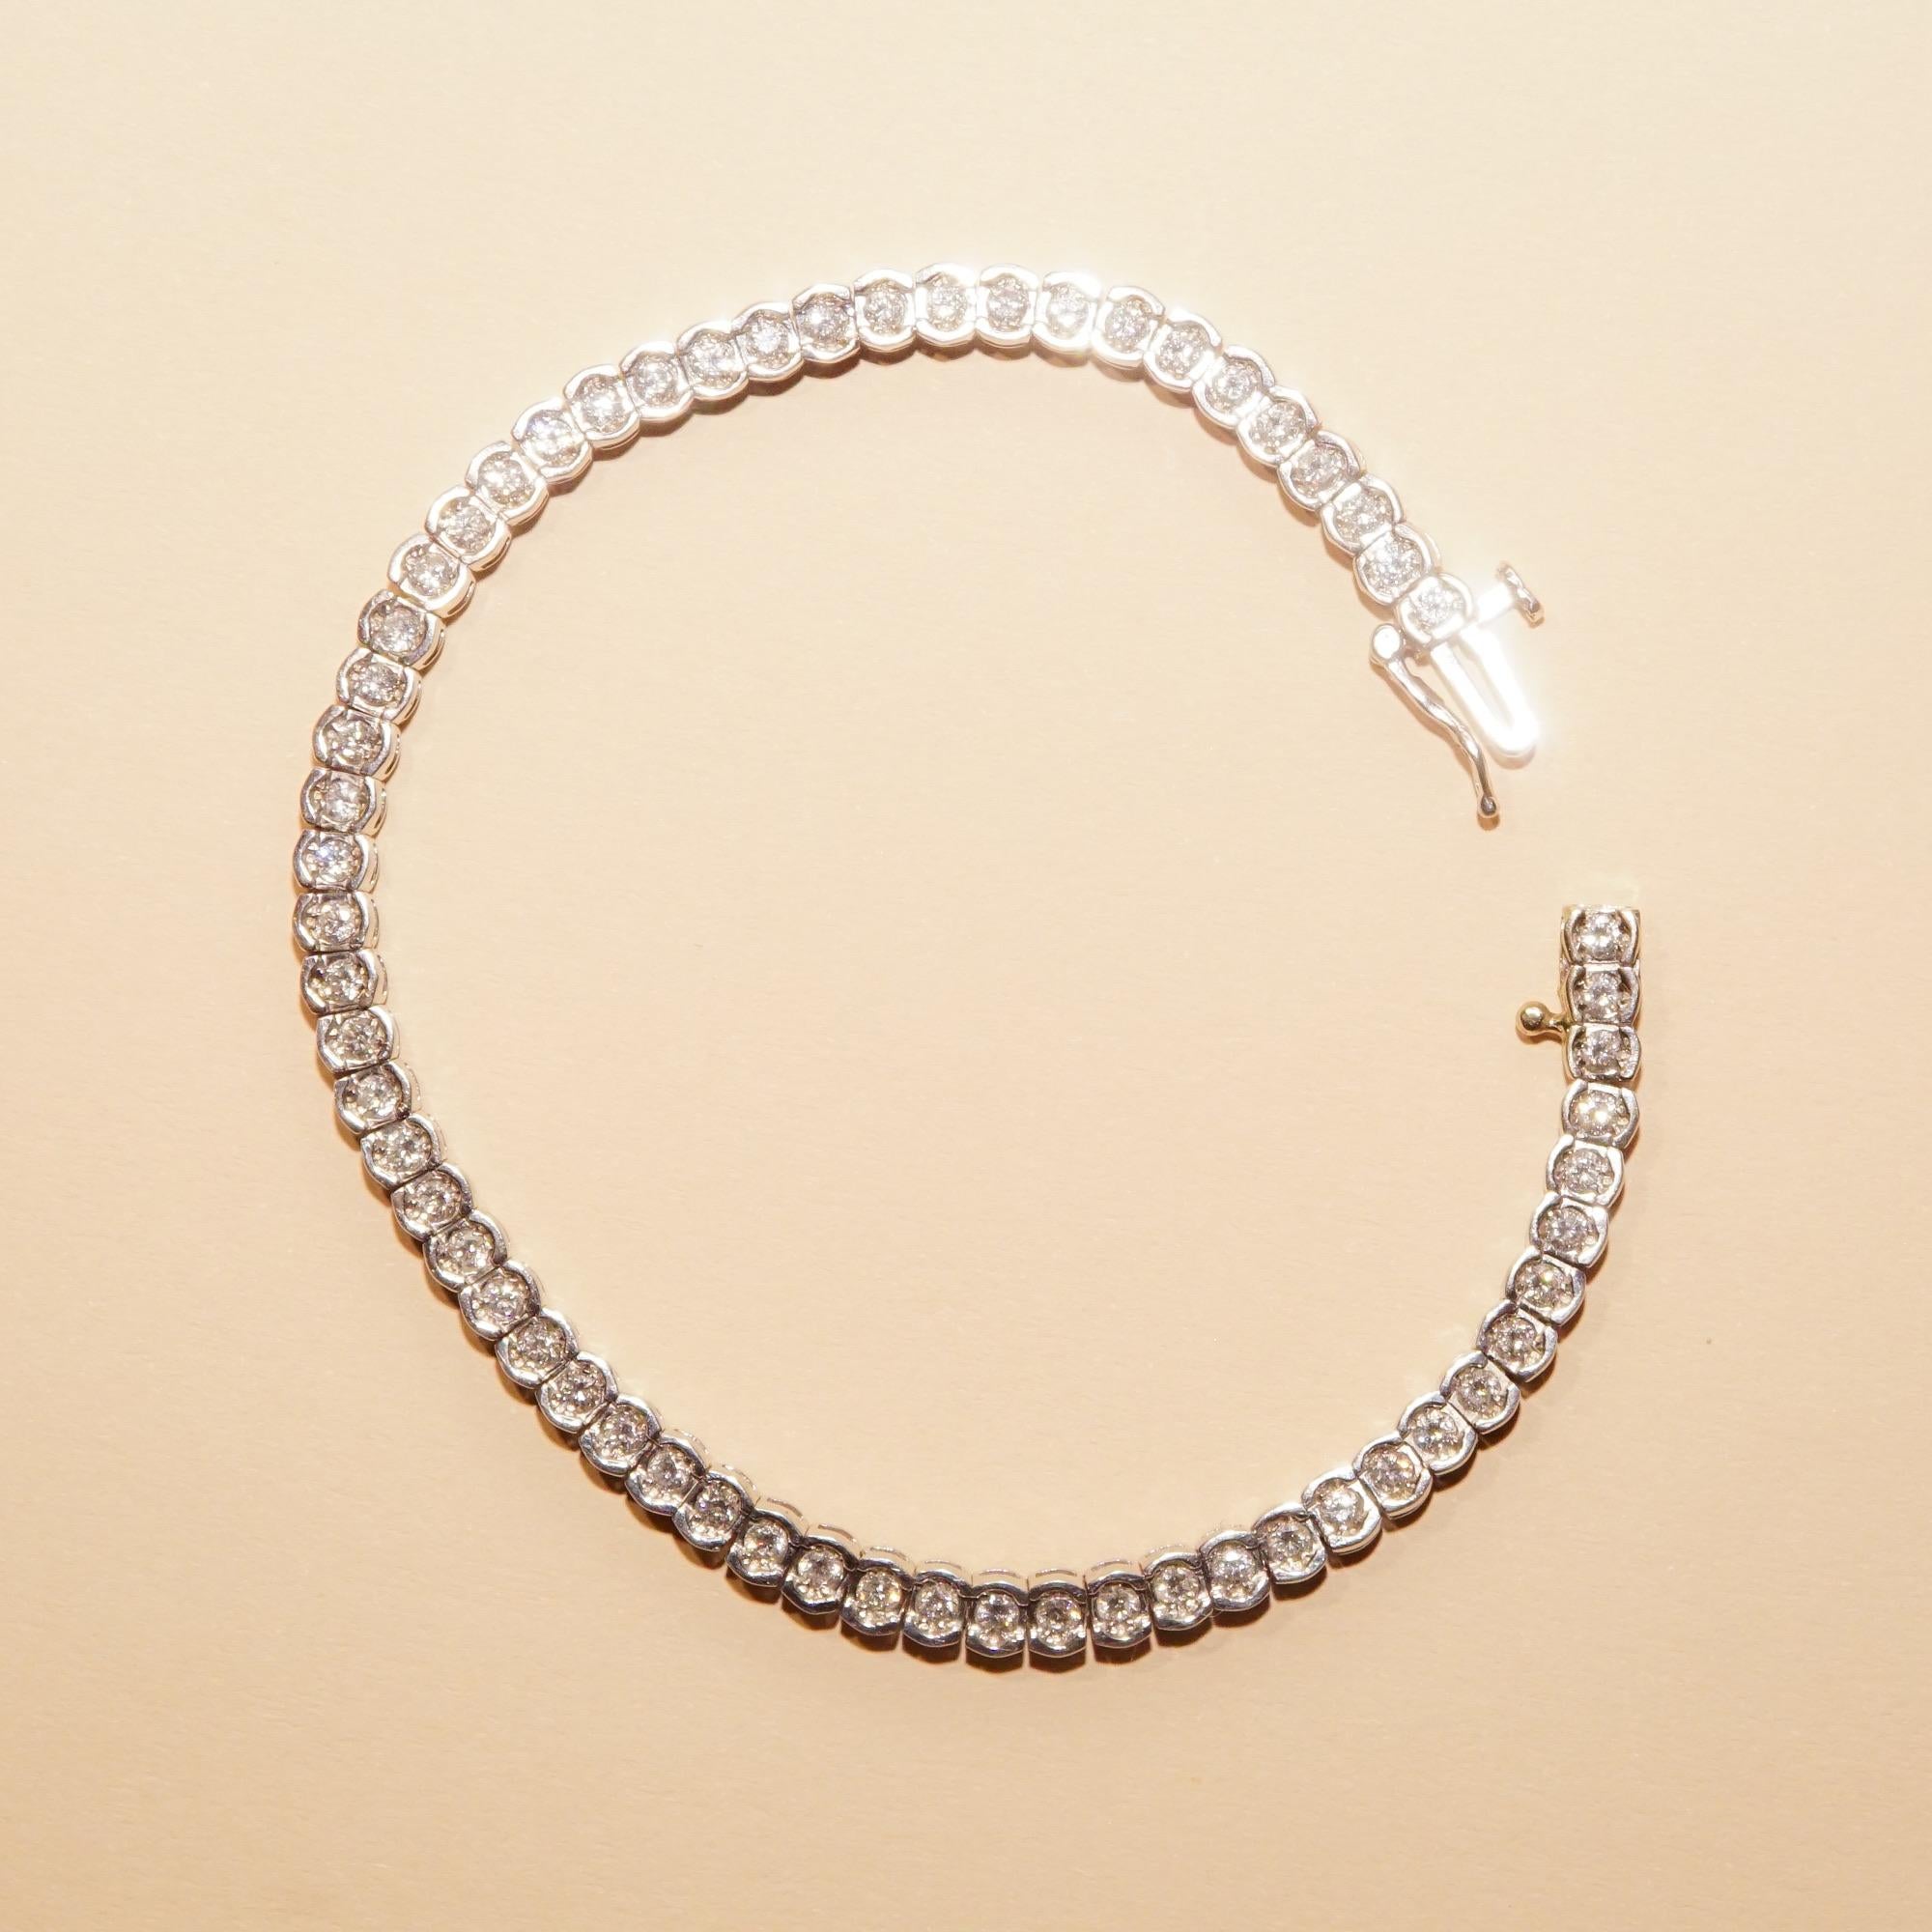 A modern take on a traditional diamond tennis bracelet. Crafted in 14k white gold with 61 brilliant diamonds. Definitely a great gift for a loved on this holiday season!

Features a sleek articulated ribbon of white half-bezel links each set with a